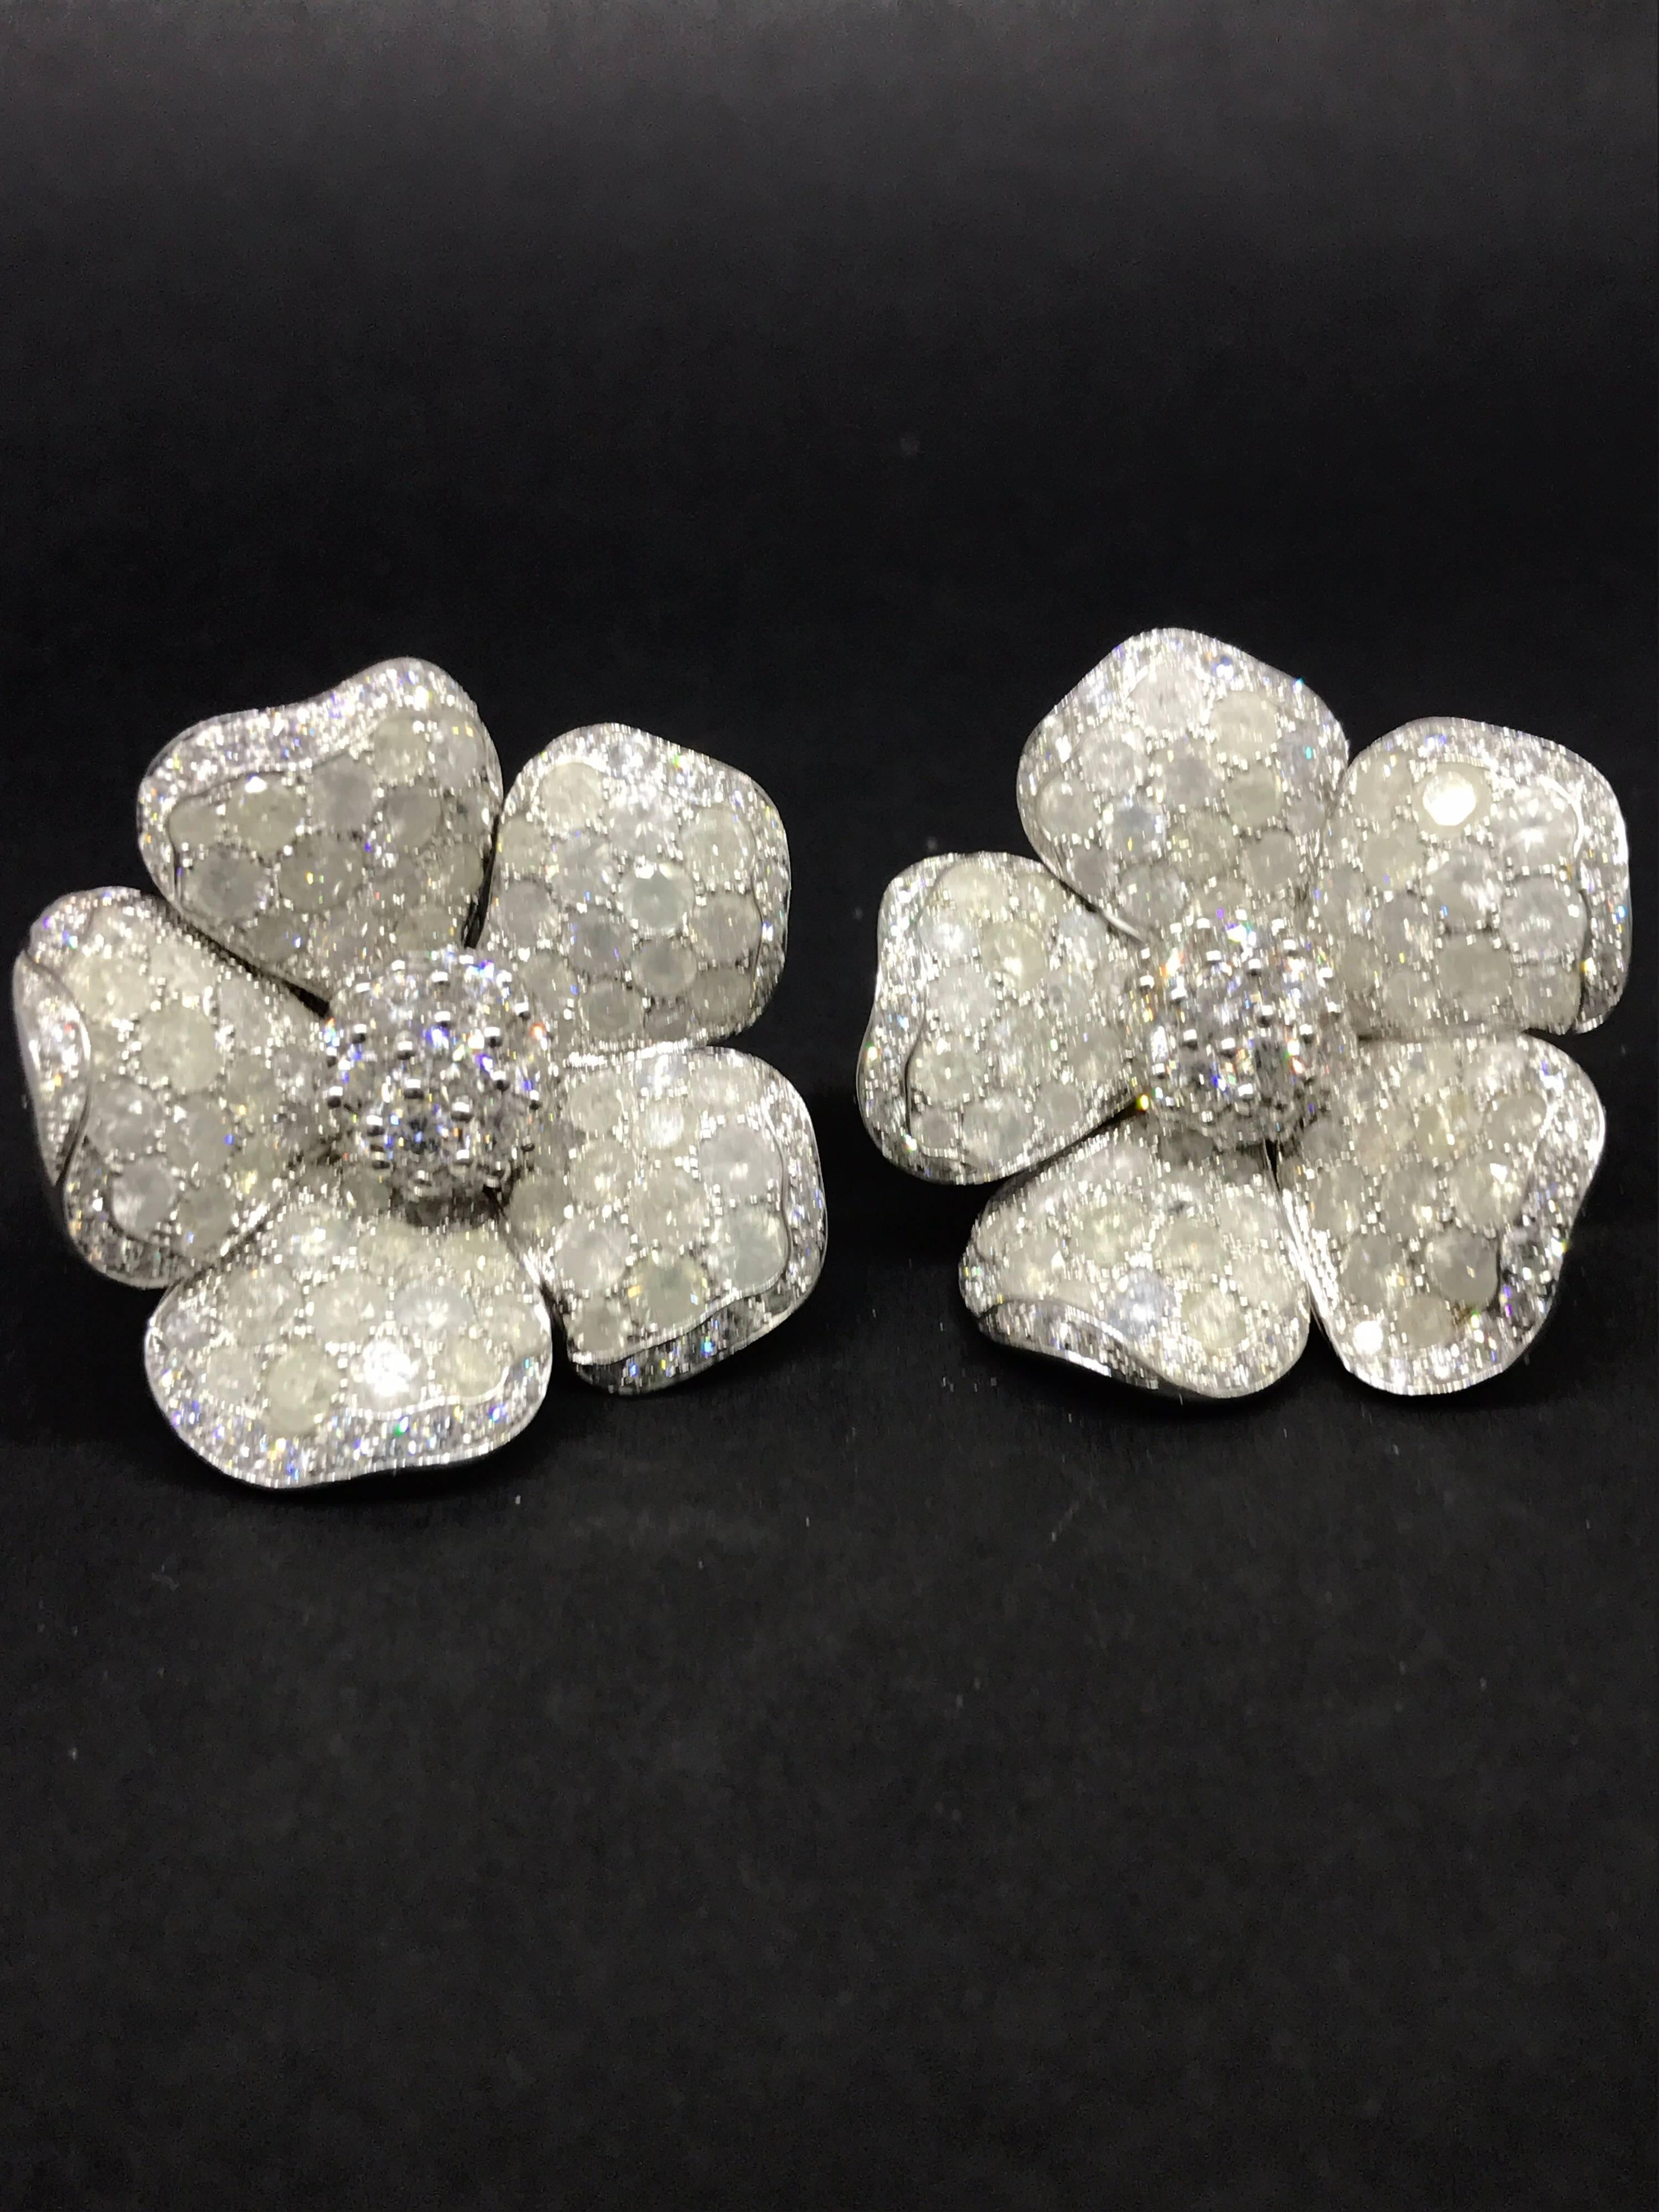 De Grisogono Large Flower Earrings

Model Number: 18202/02-003

100% Authentic

New / Old Stock

Earrings set with Icy White Diamonds (22.87 Carats) and white diamonds (7.87 Carats)

Can fasten as a butterfly or just clip-on